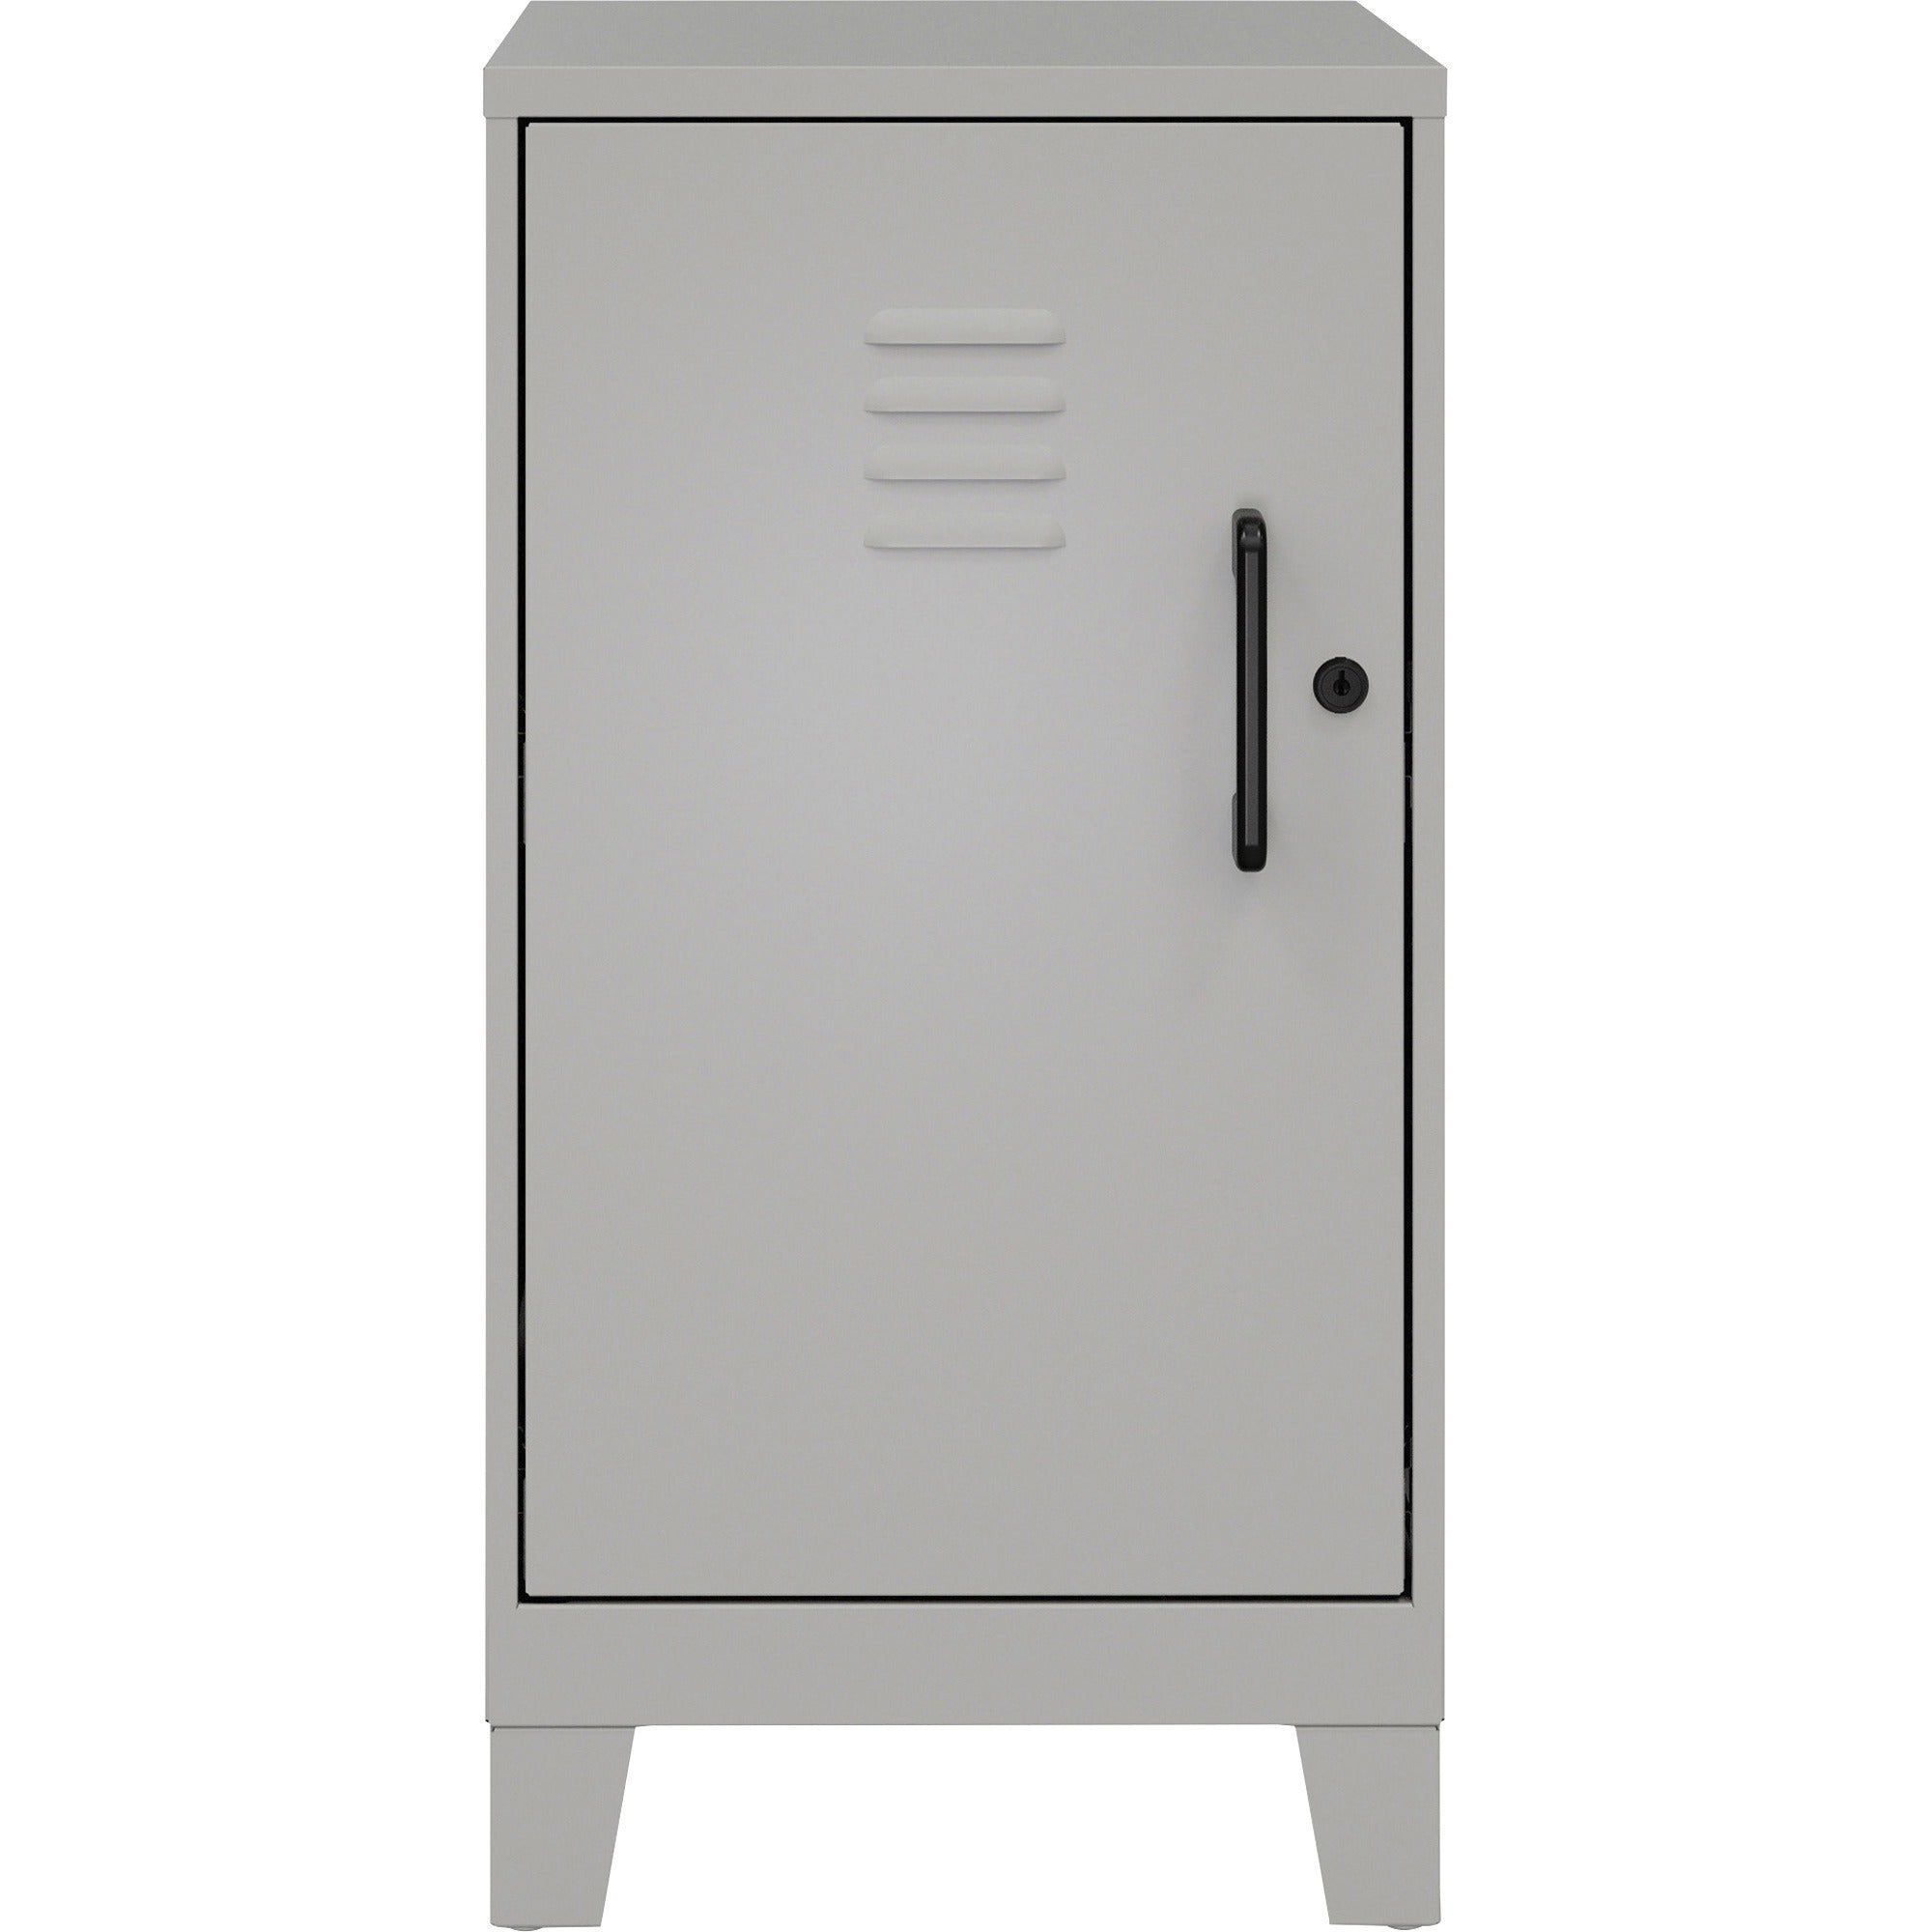 nusparc-personal-locker-2-shelves-for-office-home-sport-equipments-toy-game-classroom-playroom-basement-garage-overall-size-275-x-142-x-18-silver-steel-taa-compliant_nprsl218zzsr - 2